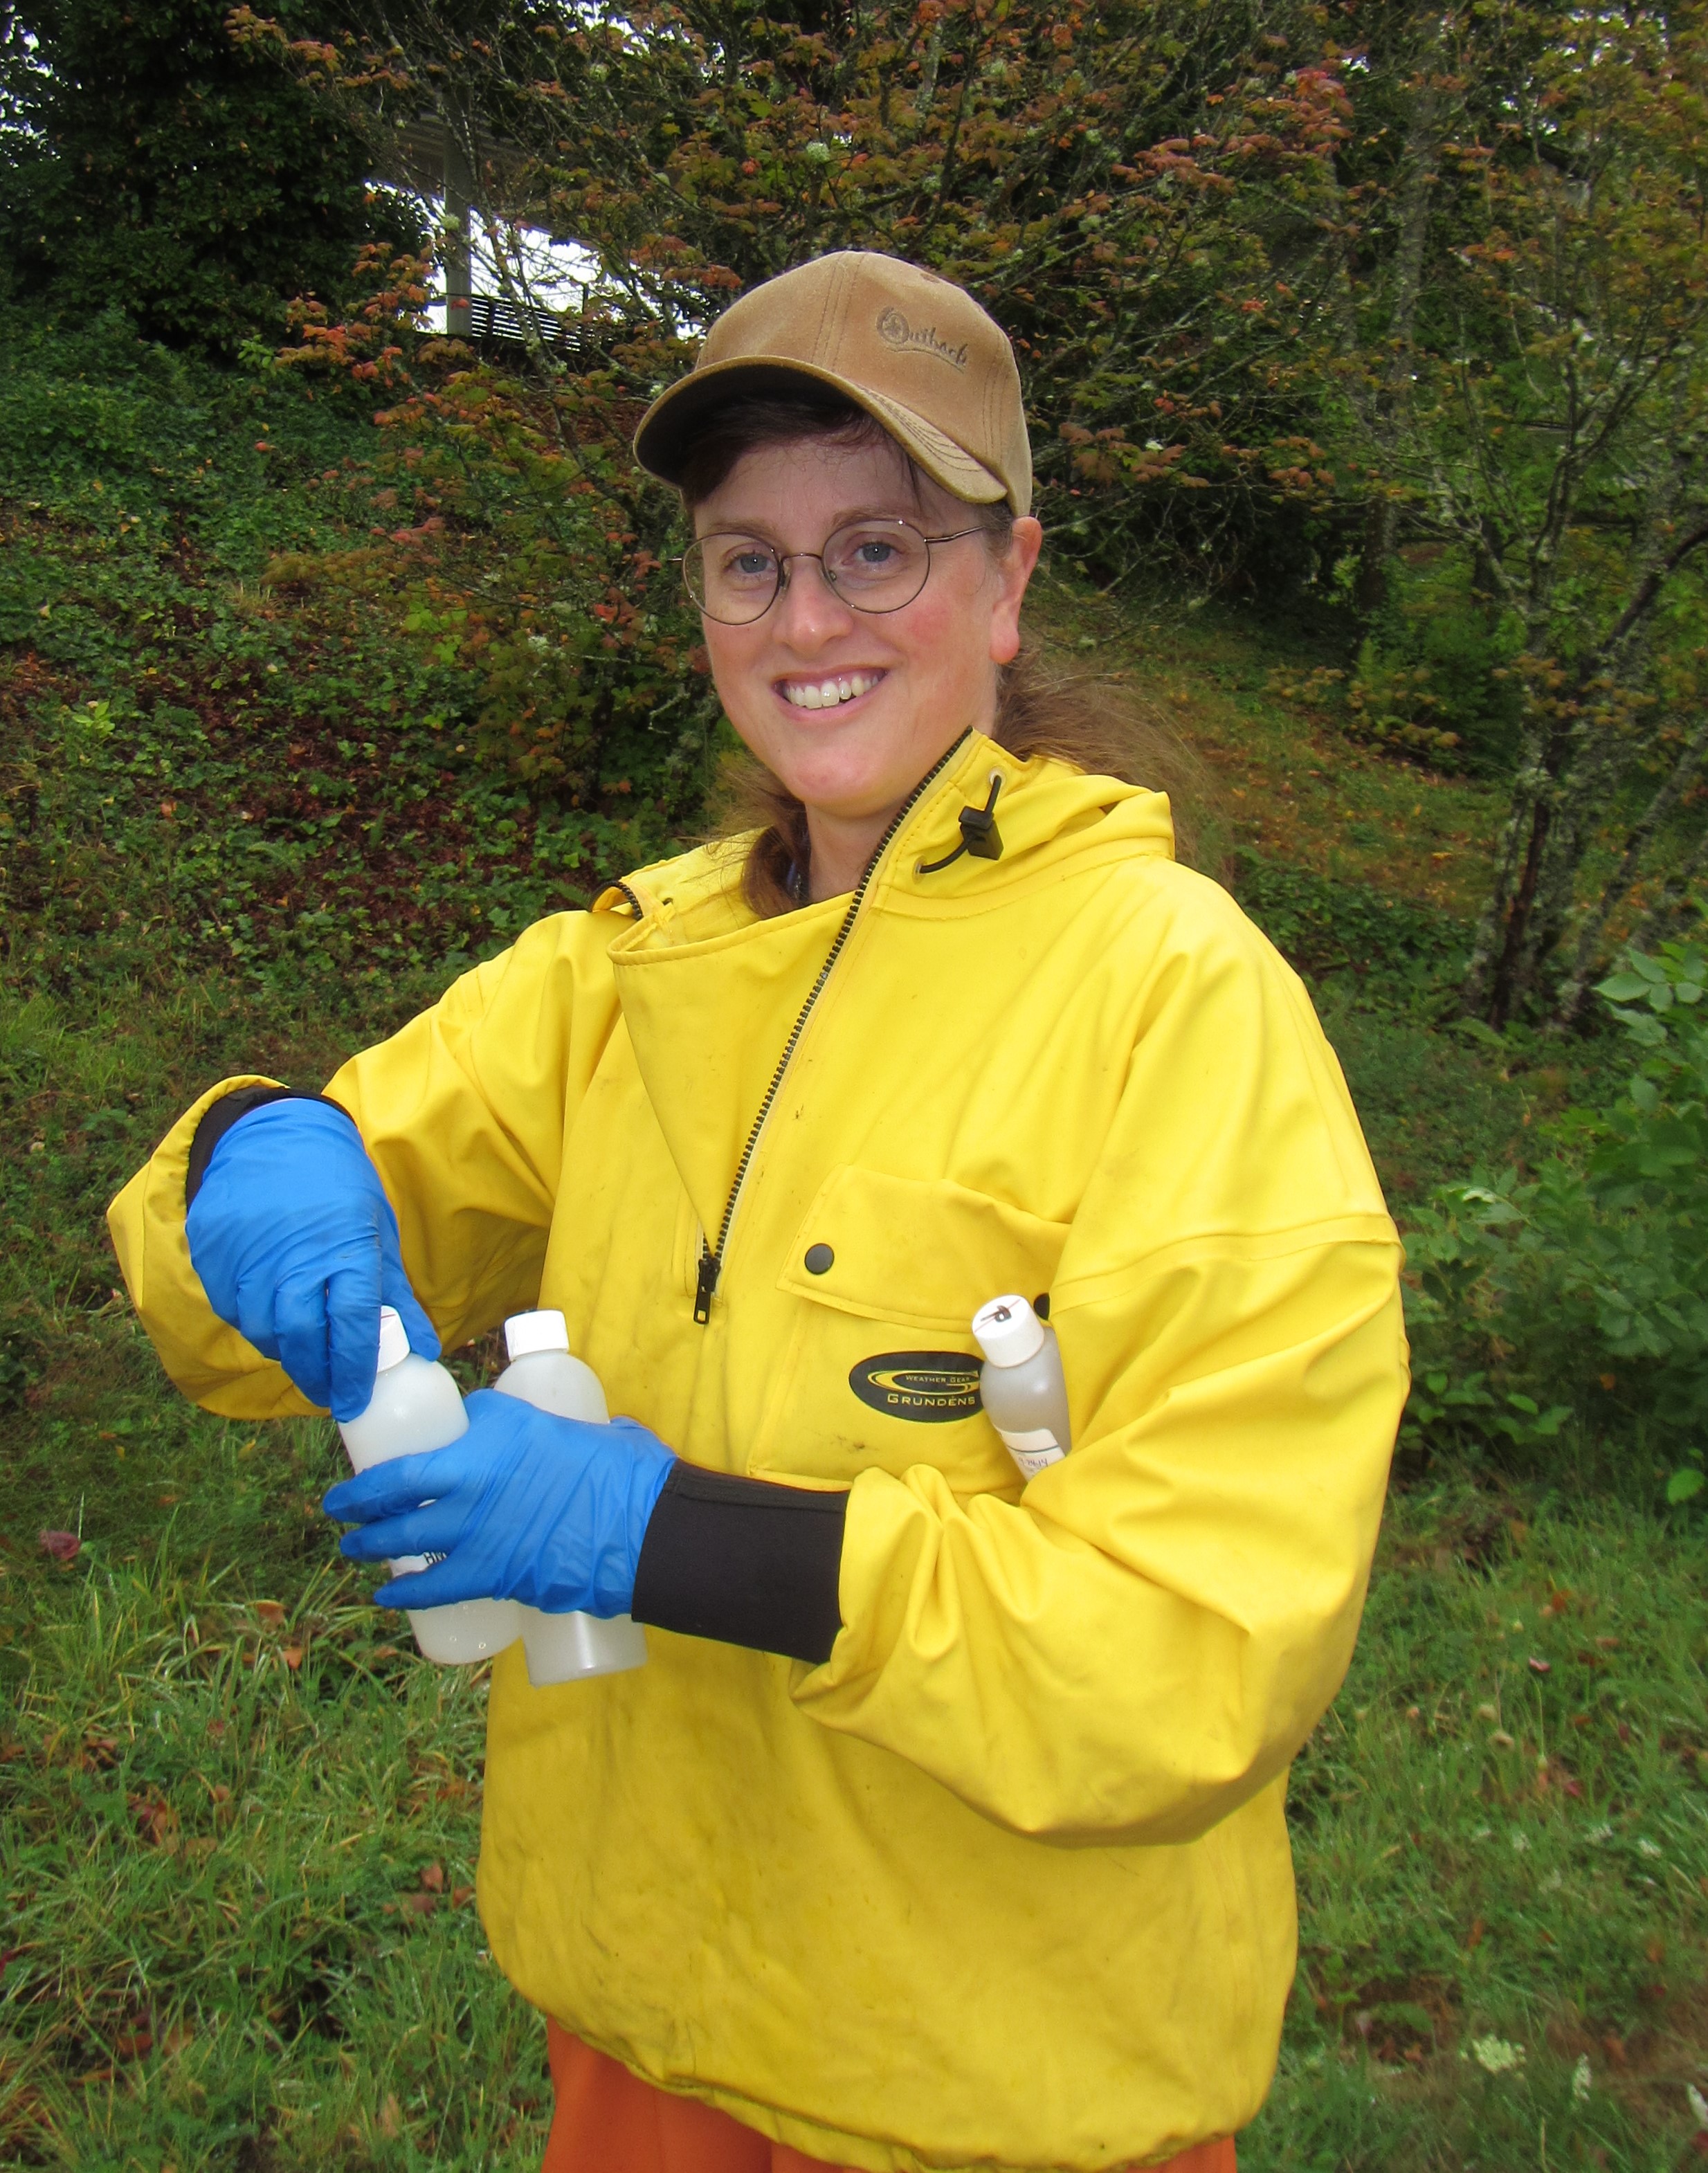 Julann Spromberg, wearing bright yellow waterproof gear, smiles while holding several sample bottles